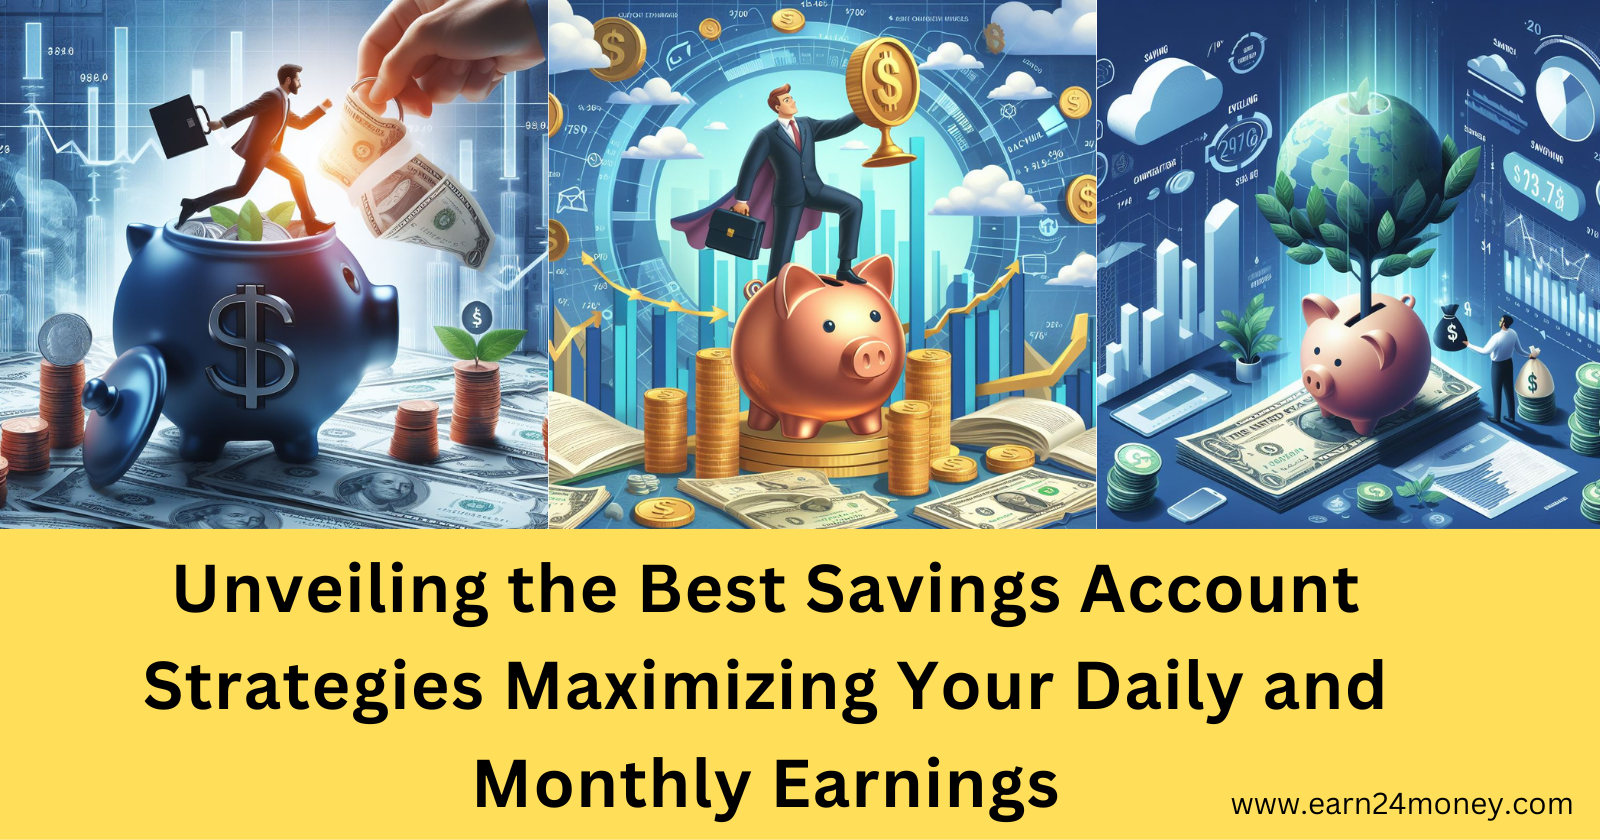 Unveiling the Best Savings Account Strategies Maximizing Your Daily and Monthly Earnings